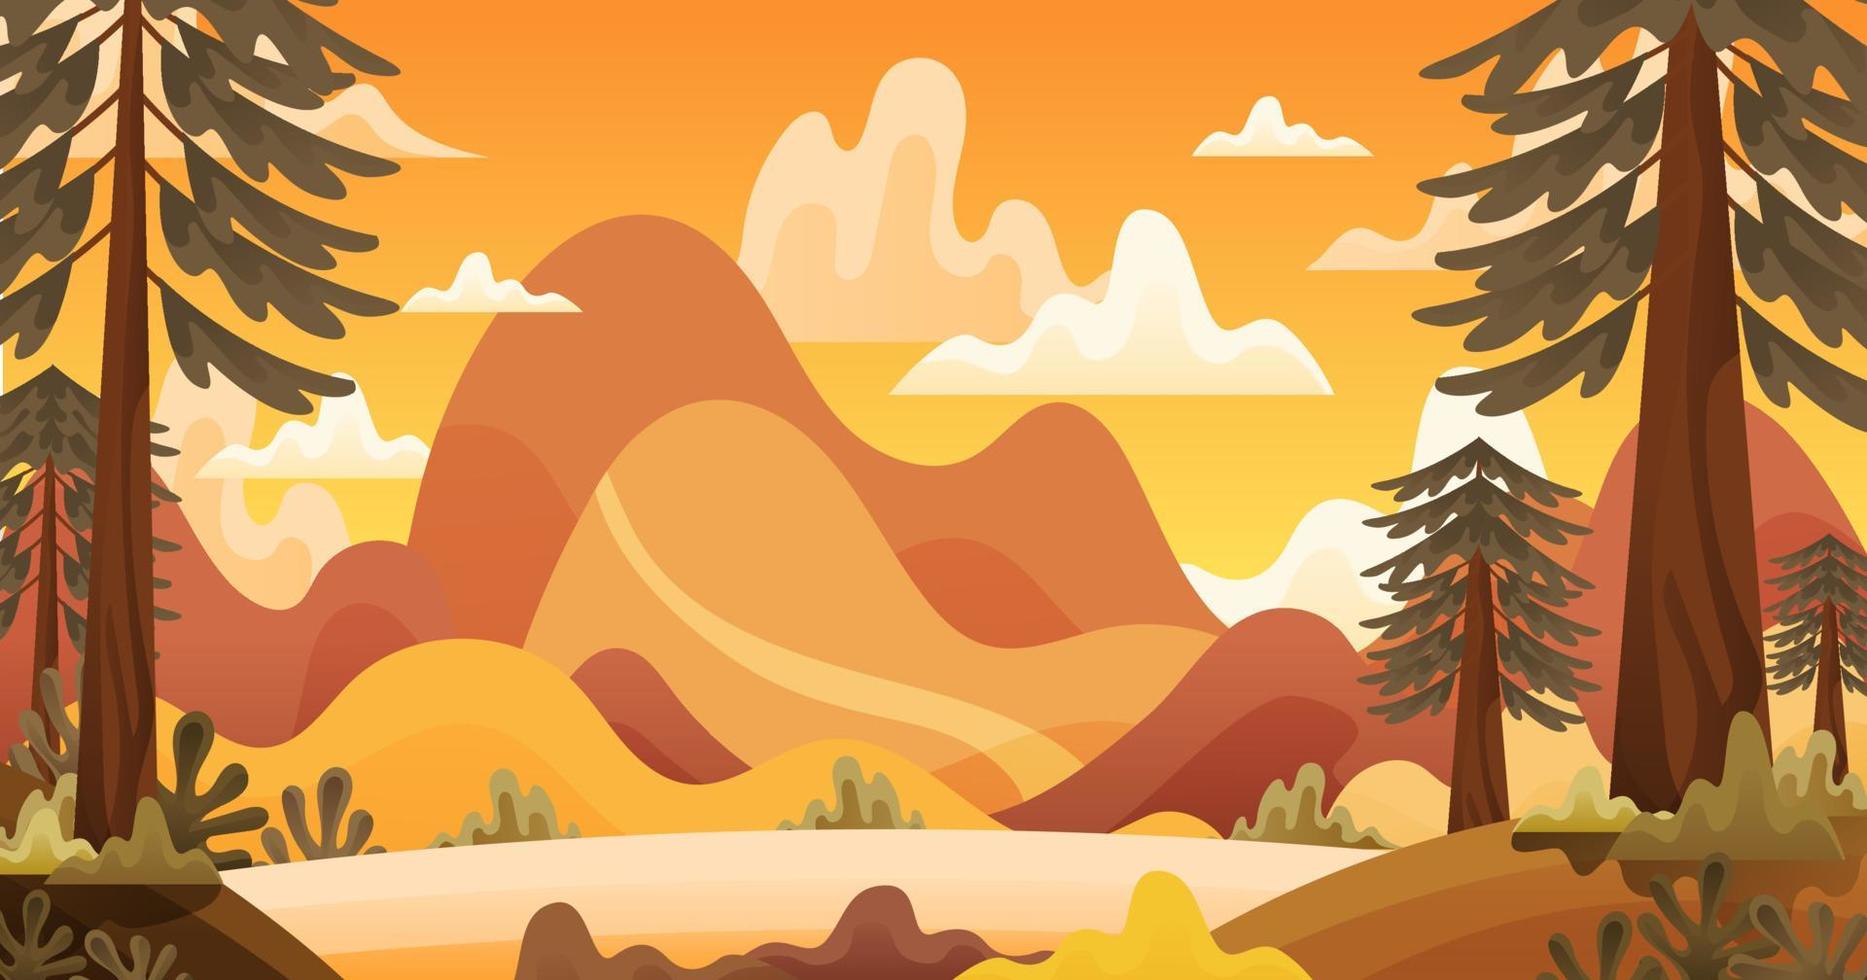 Autumn or Fall Season landscape Background Illustration with mountains and trees vector